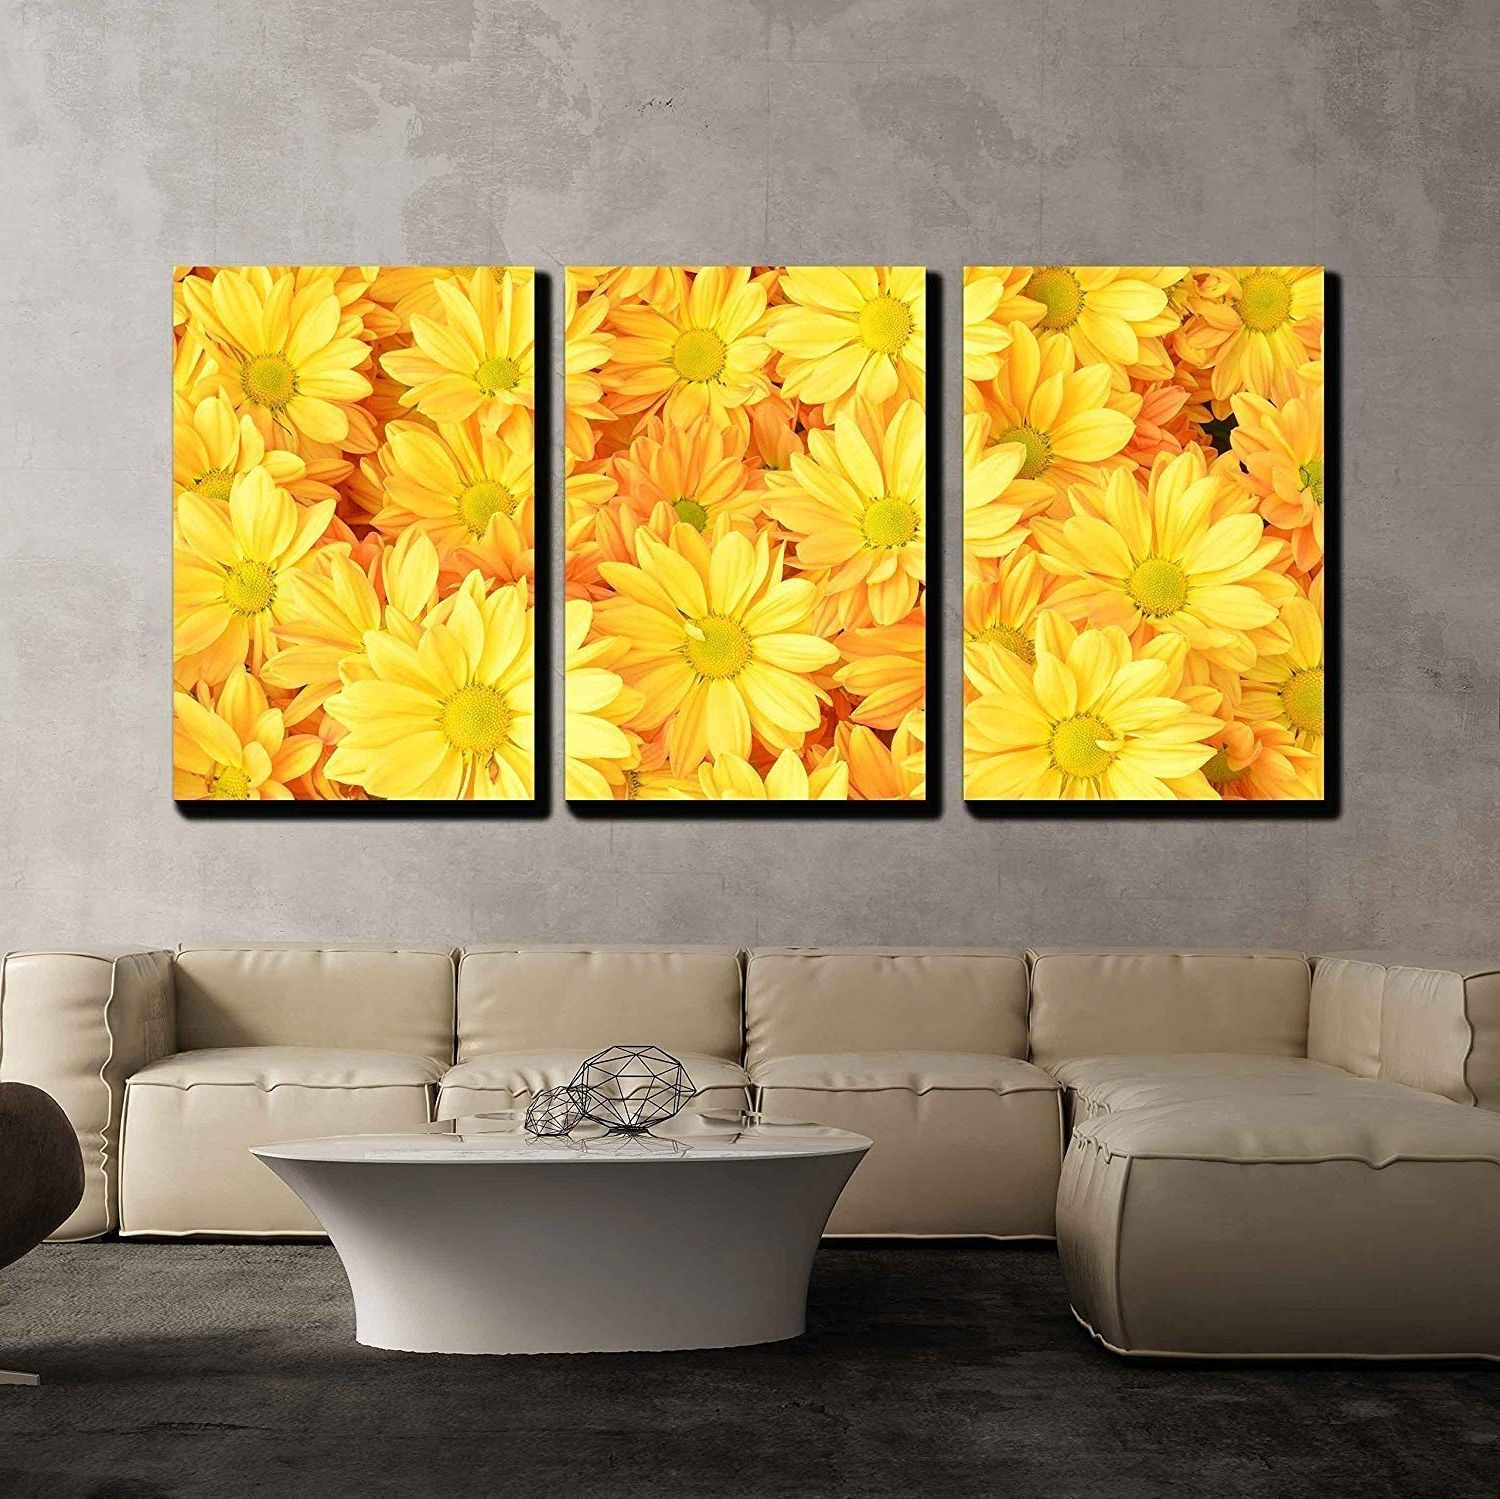 Preferred Large Wall Decor Ornaments Intended For Wall26 – 3 Piece Canvas Wall Art – Yellow Chrysanthemum Flowers (View 10 of 15)